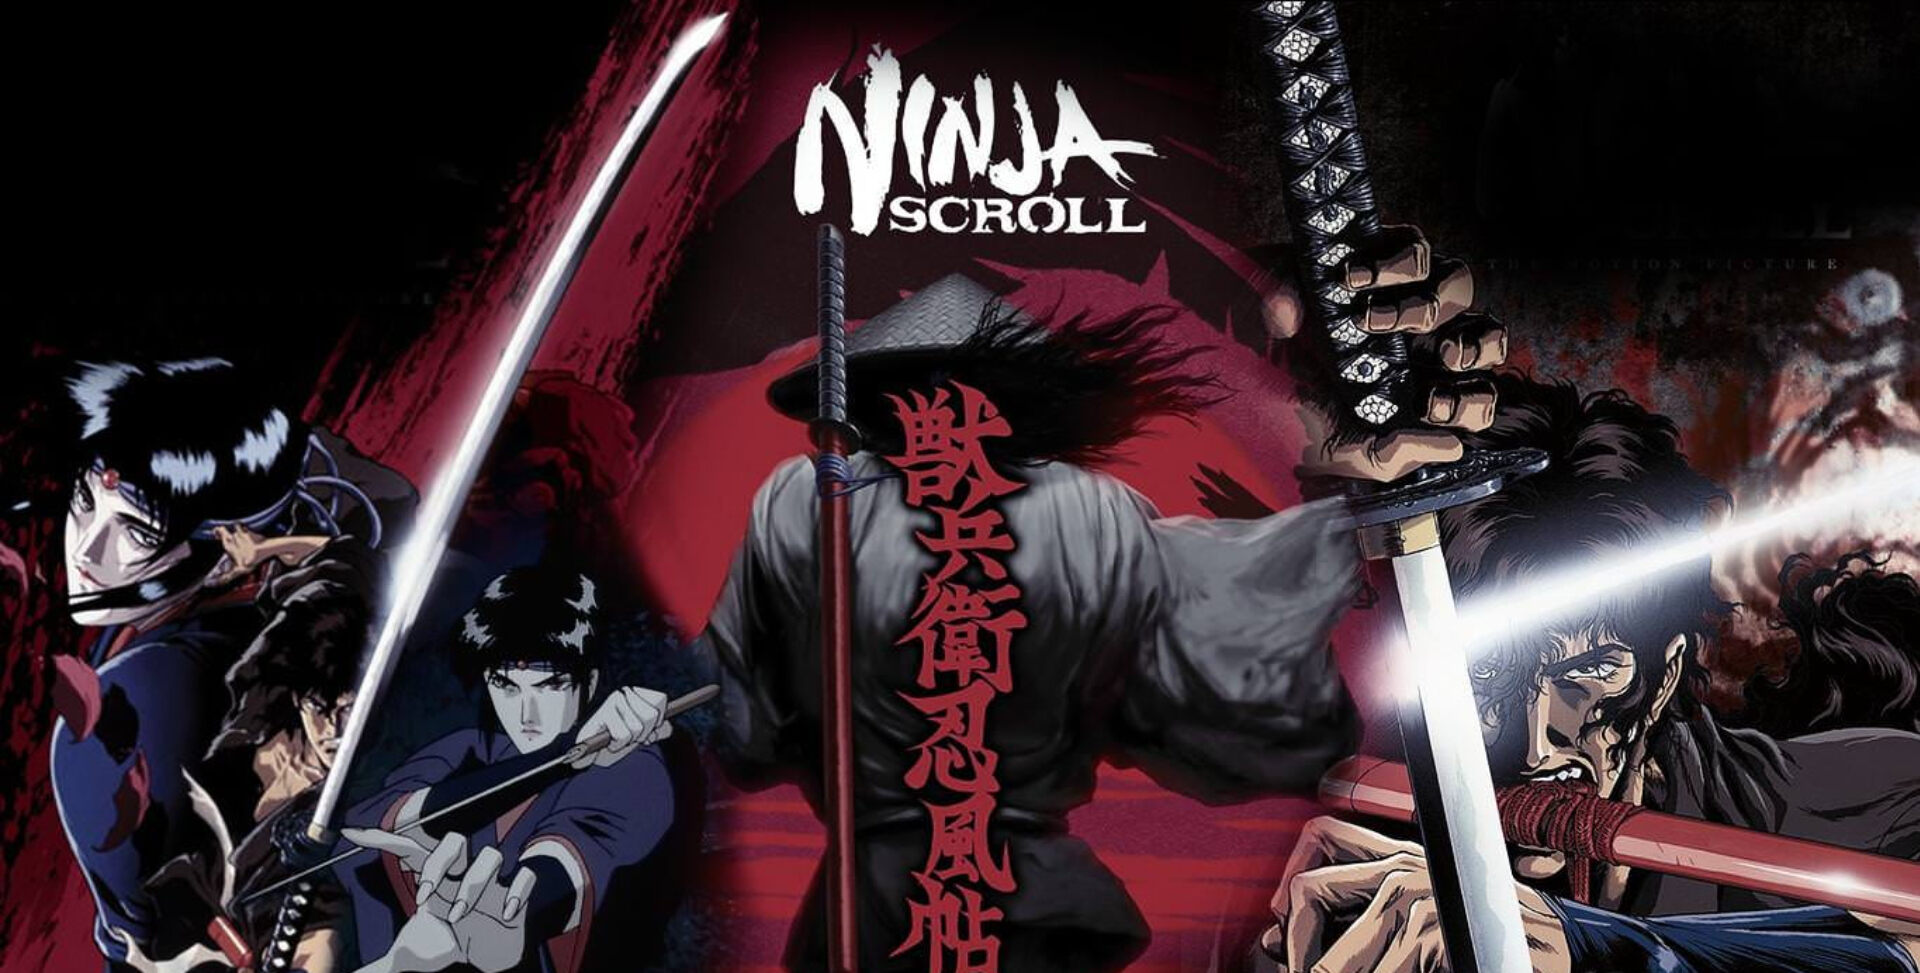 46-facts-about-the-movie-ninja-scroll